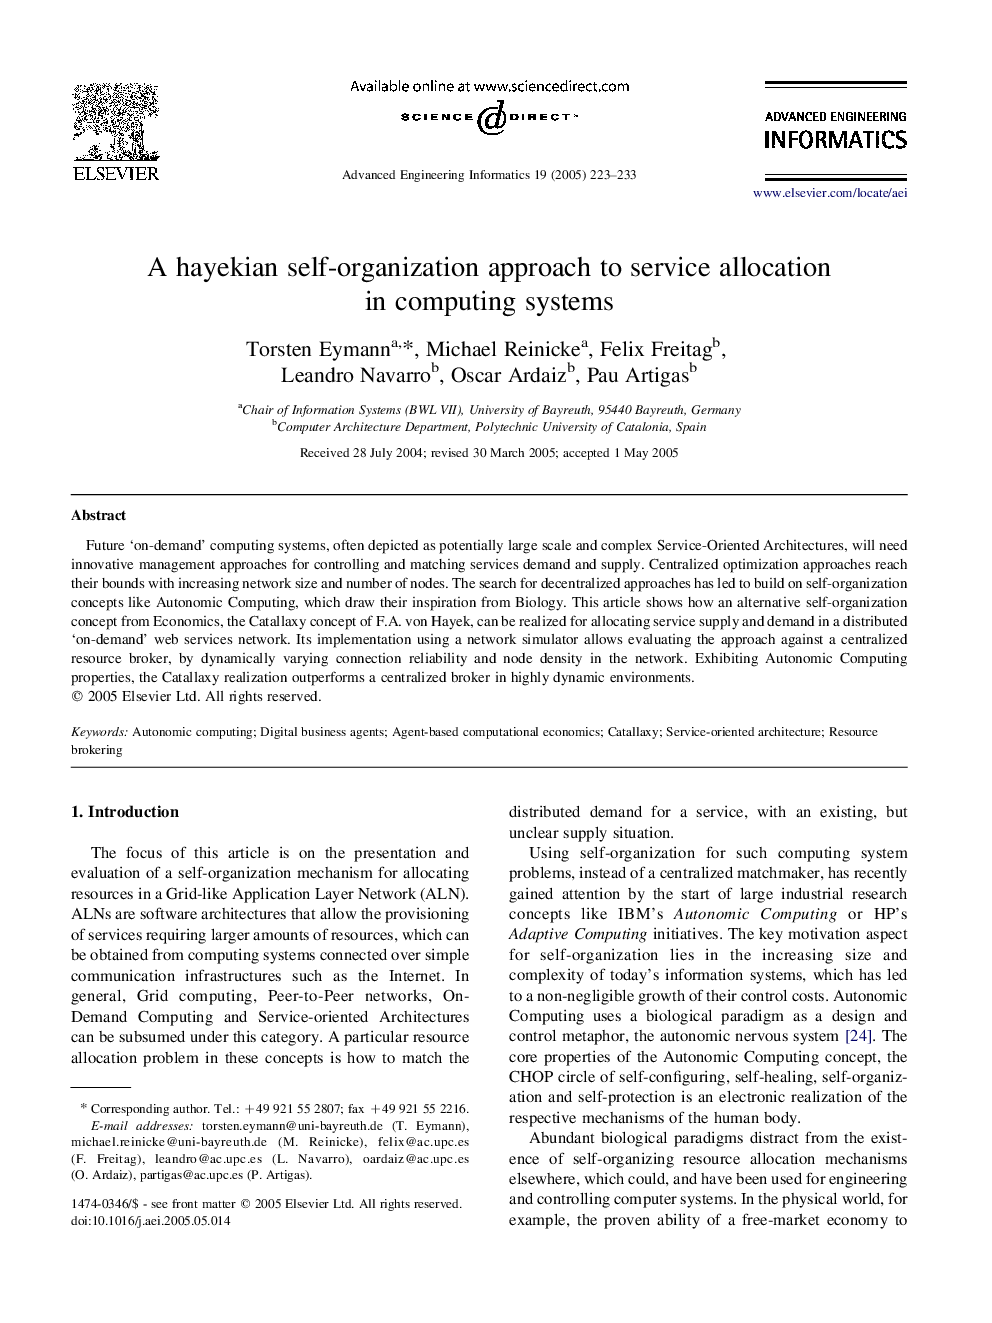 A hayekian self-organization approach to service allocation in computing systems